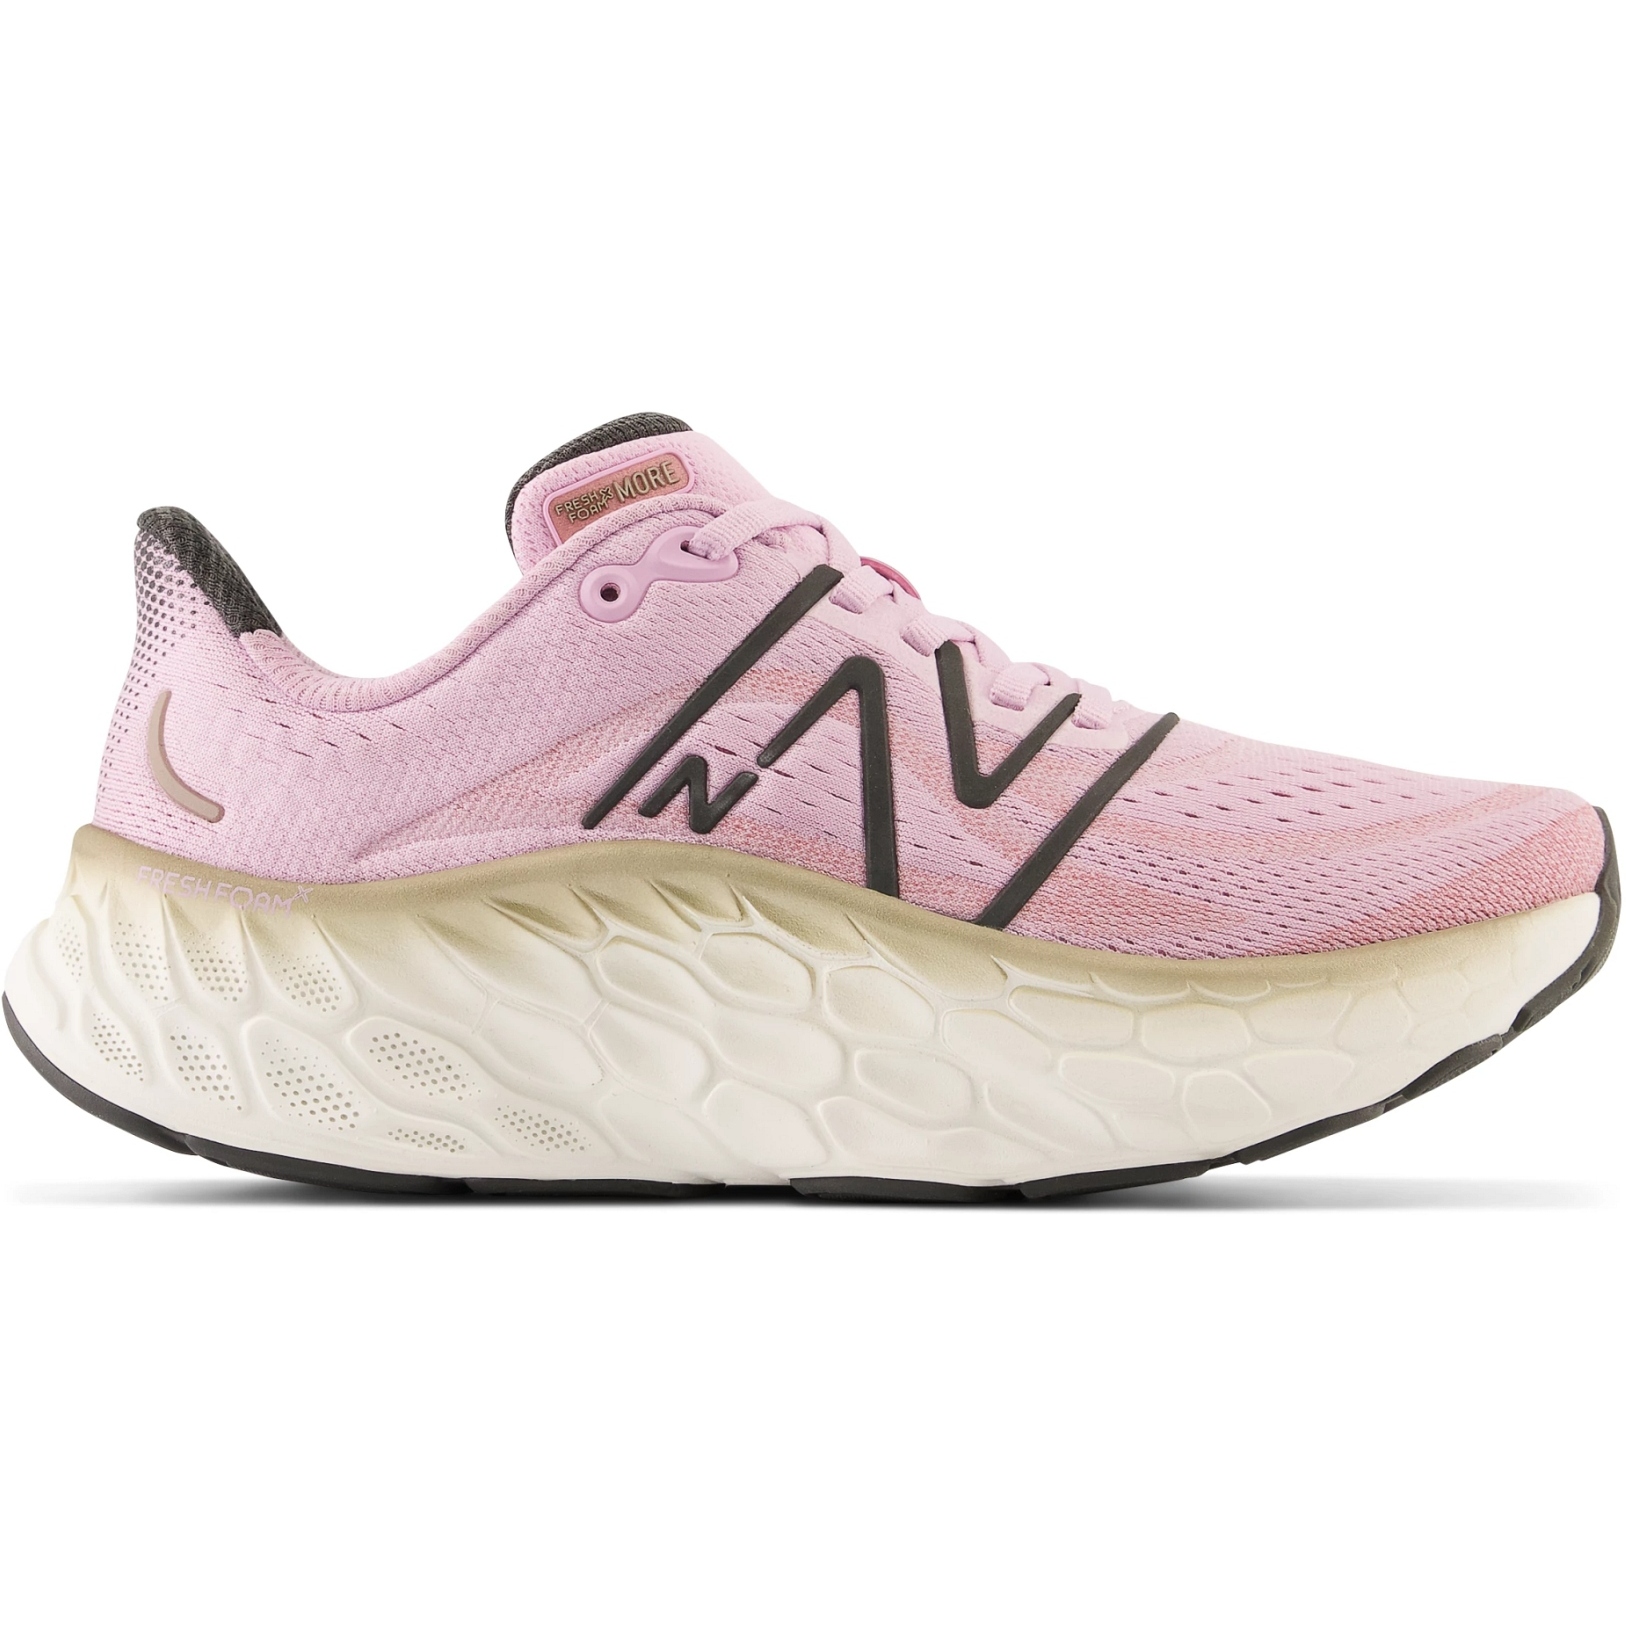 Picture of New Balance Fresh Foam X More v4 Running Shoes Women - Lilac Cloud